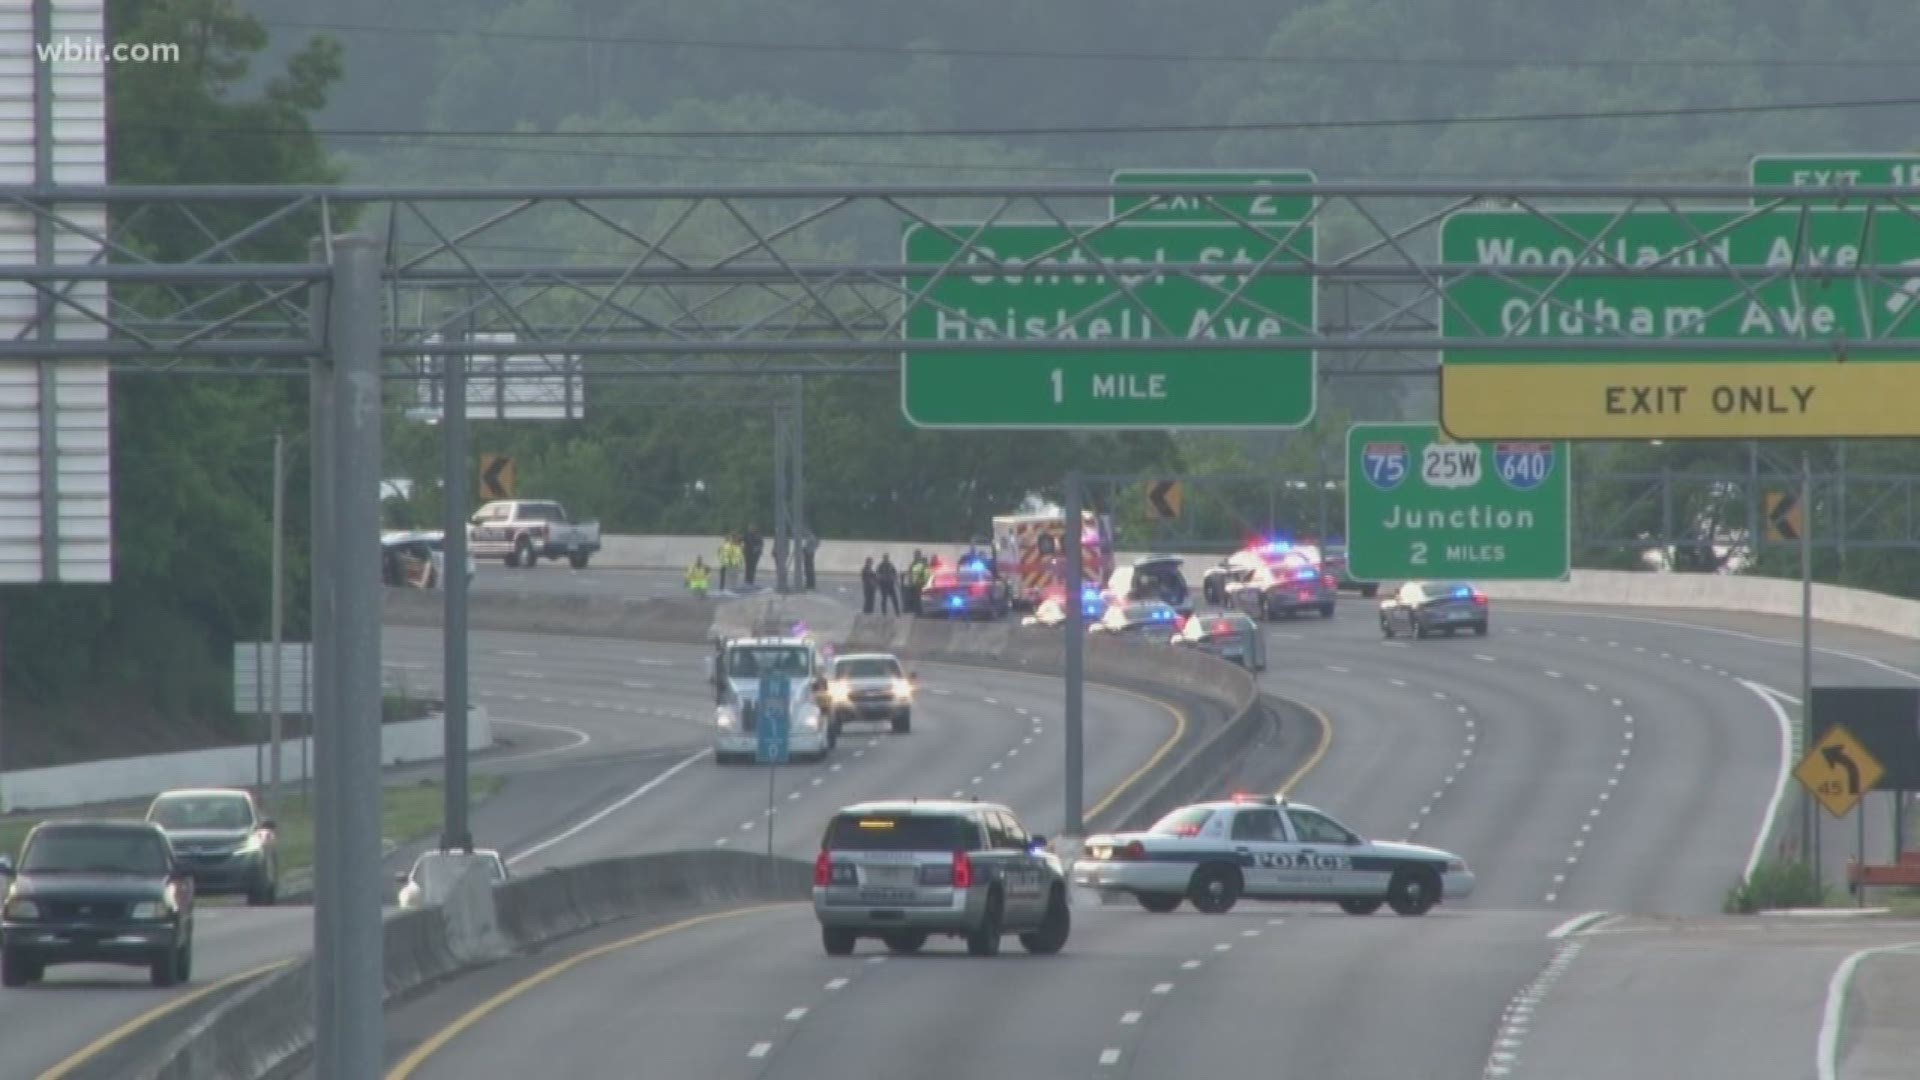 KPD says 36-year-old James S. Derrick is dead after losing control of his motorcycle on Interstate 275 near the Woodland Exit.